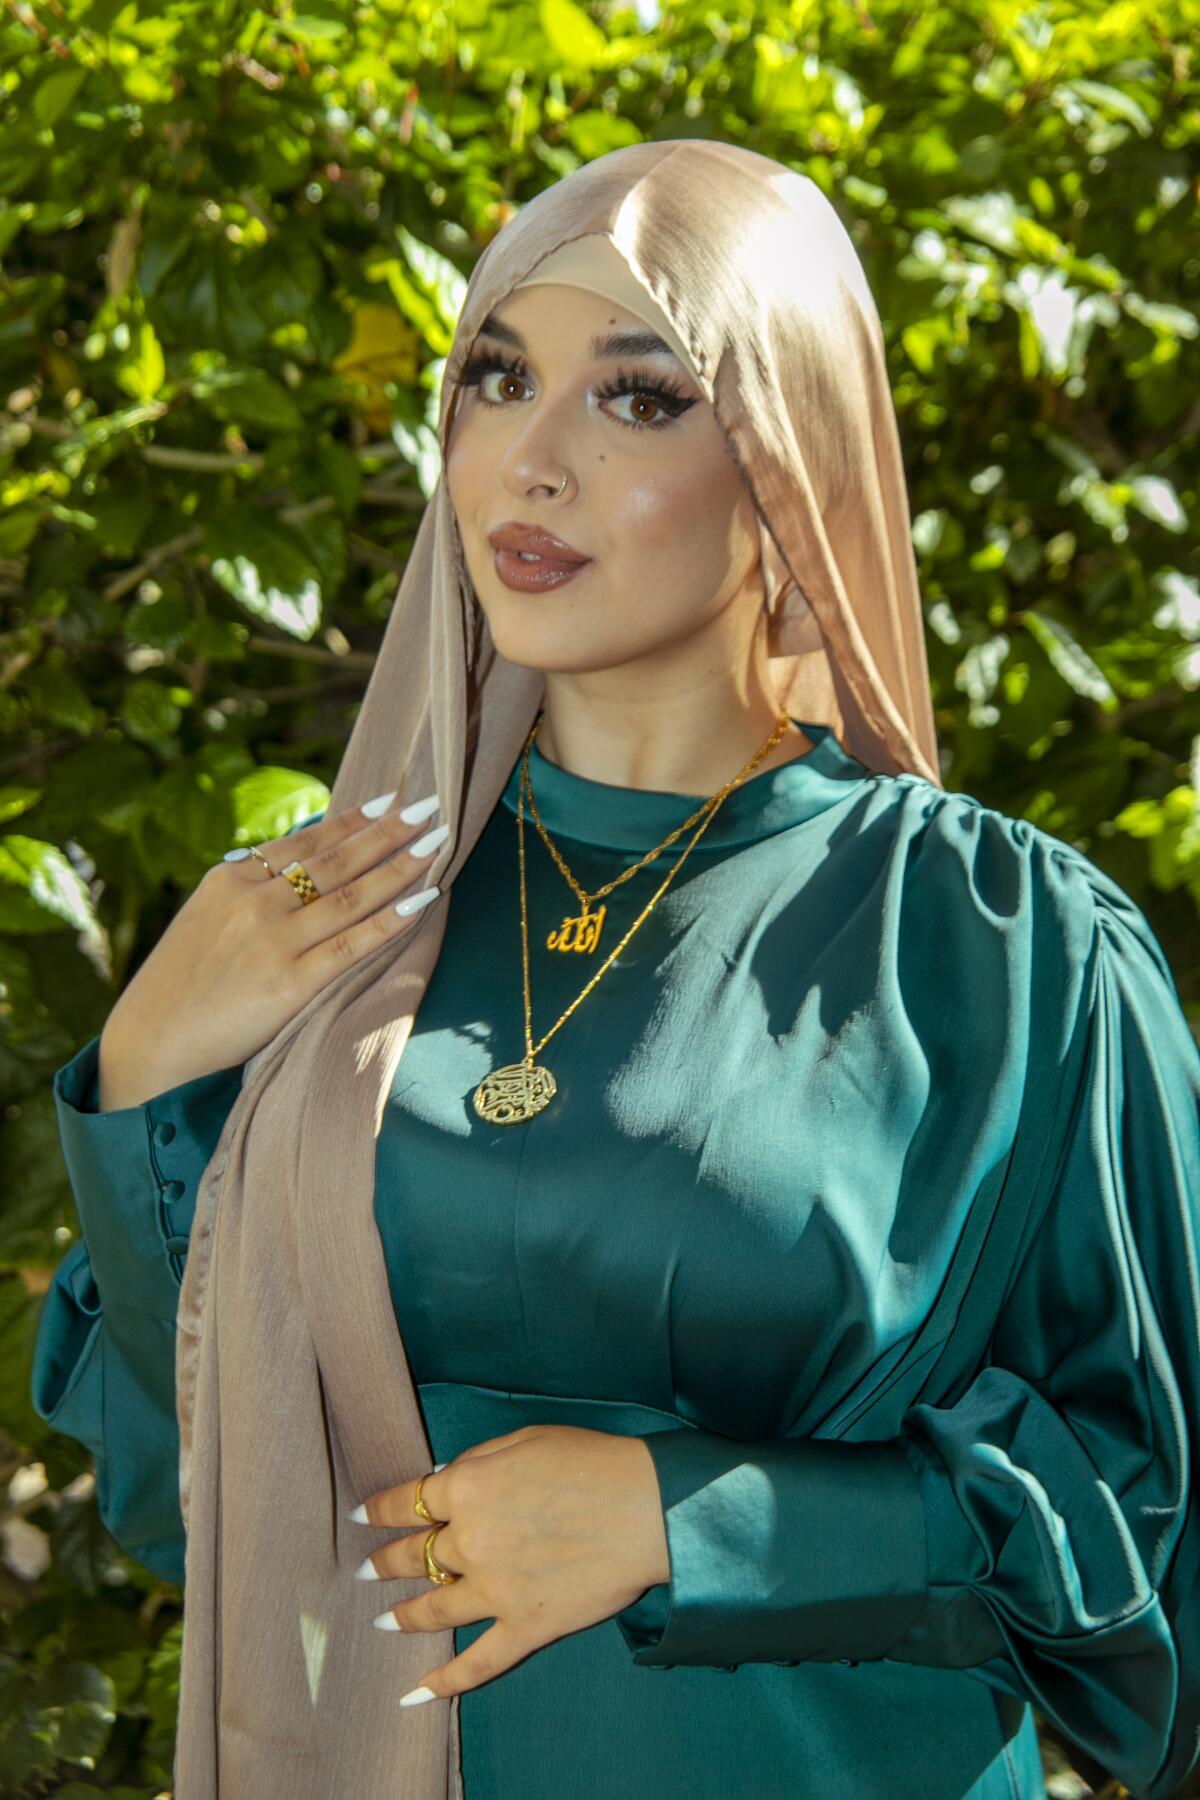 Rahan Alemi began wearing a hijab full time in August 2021.